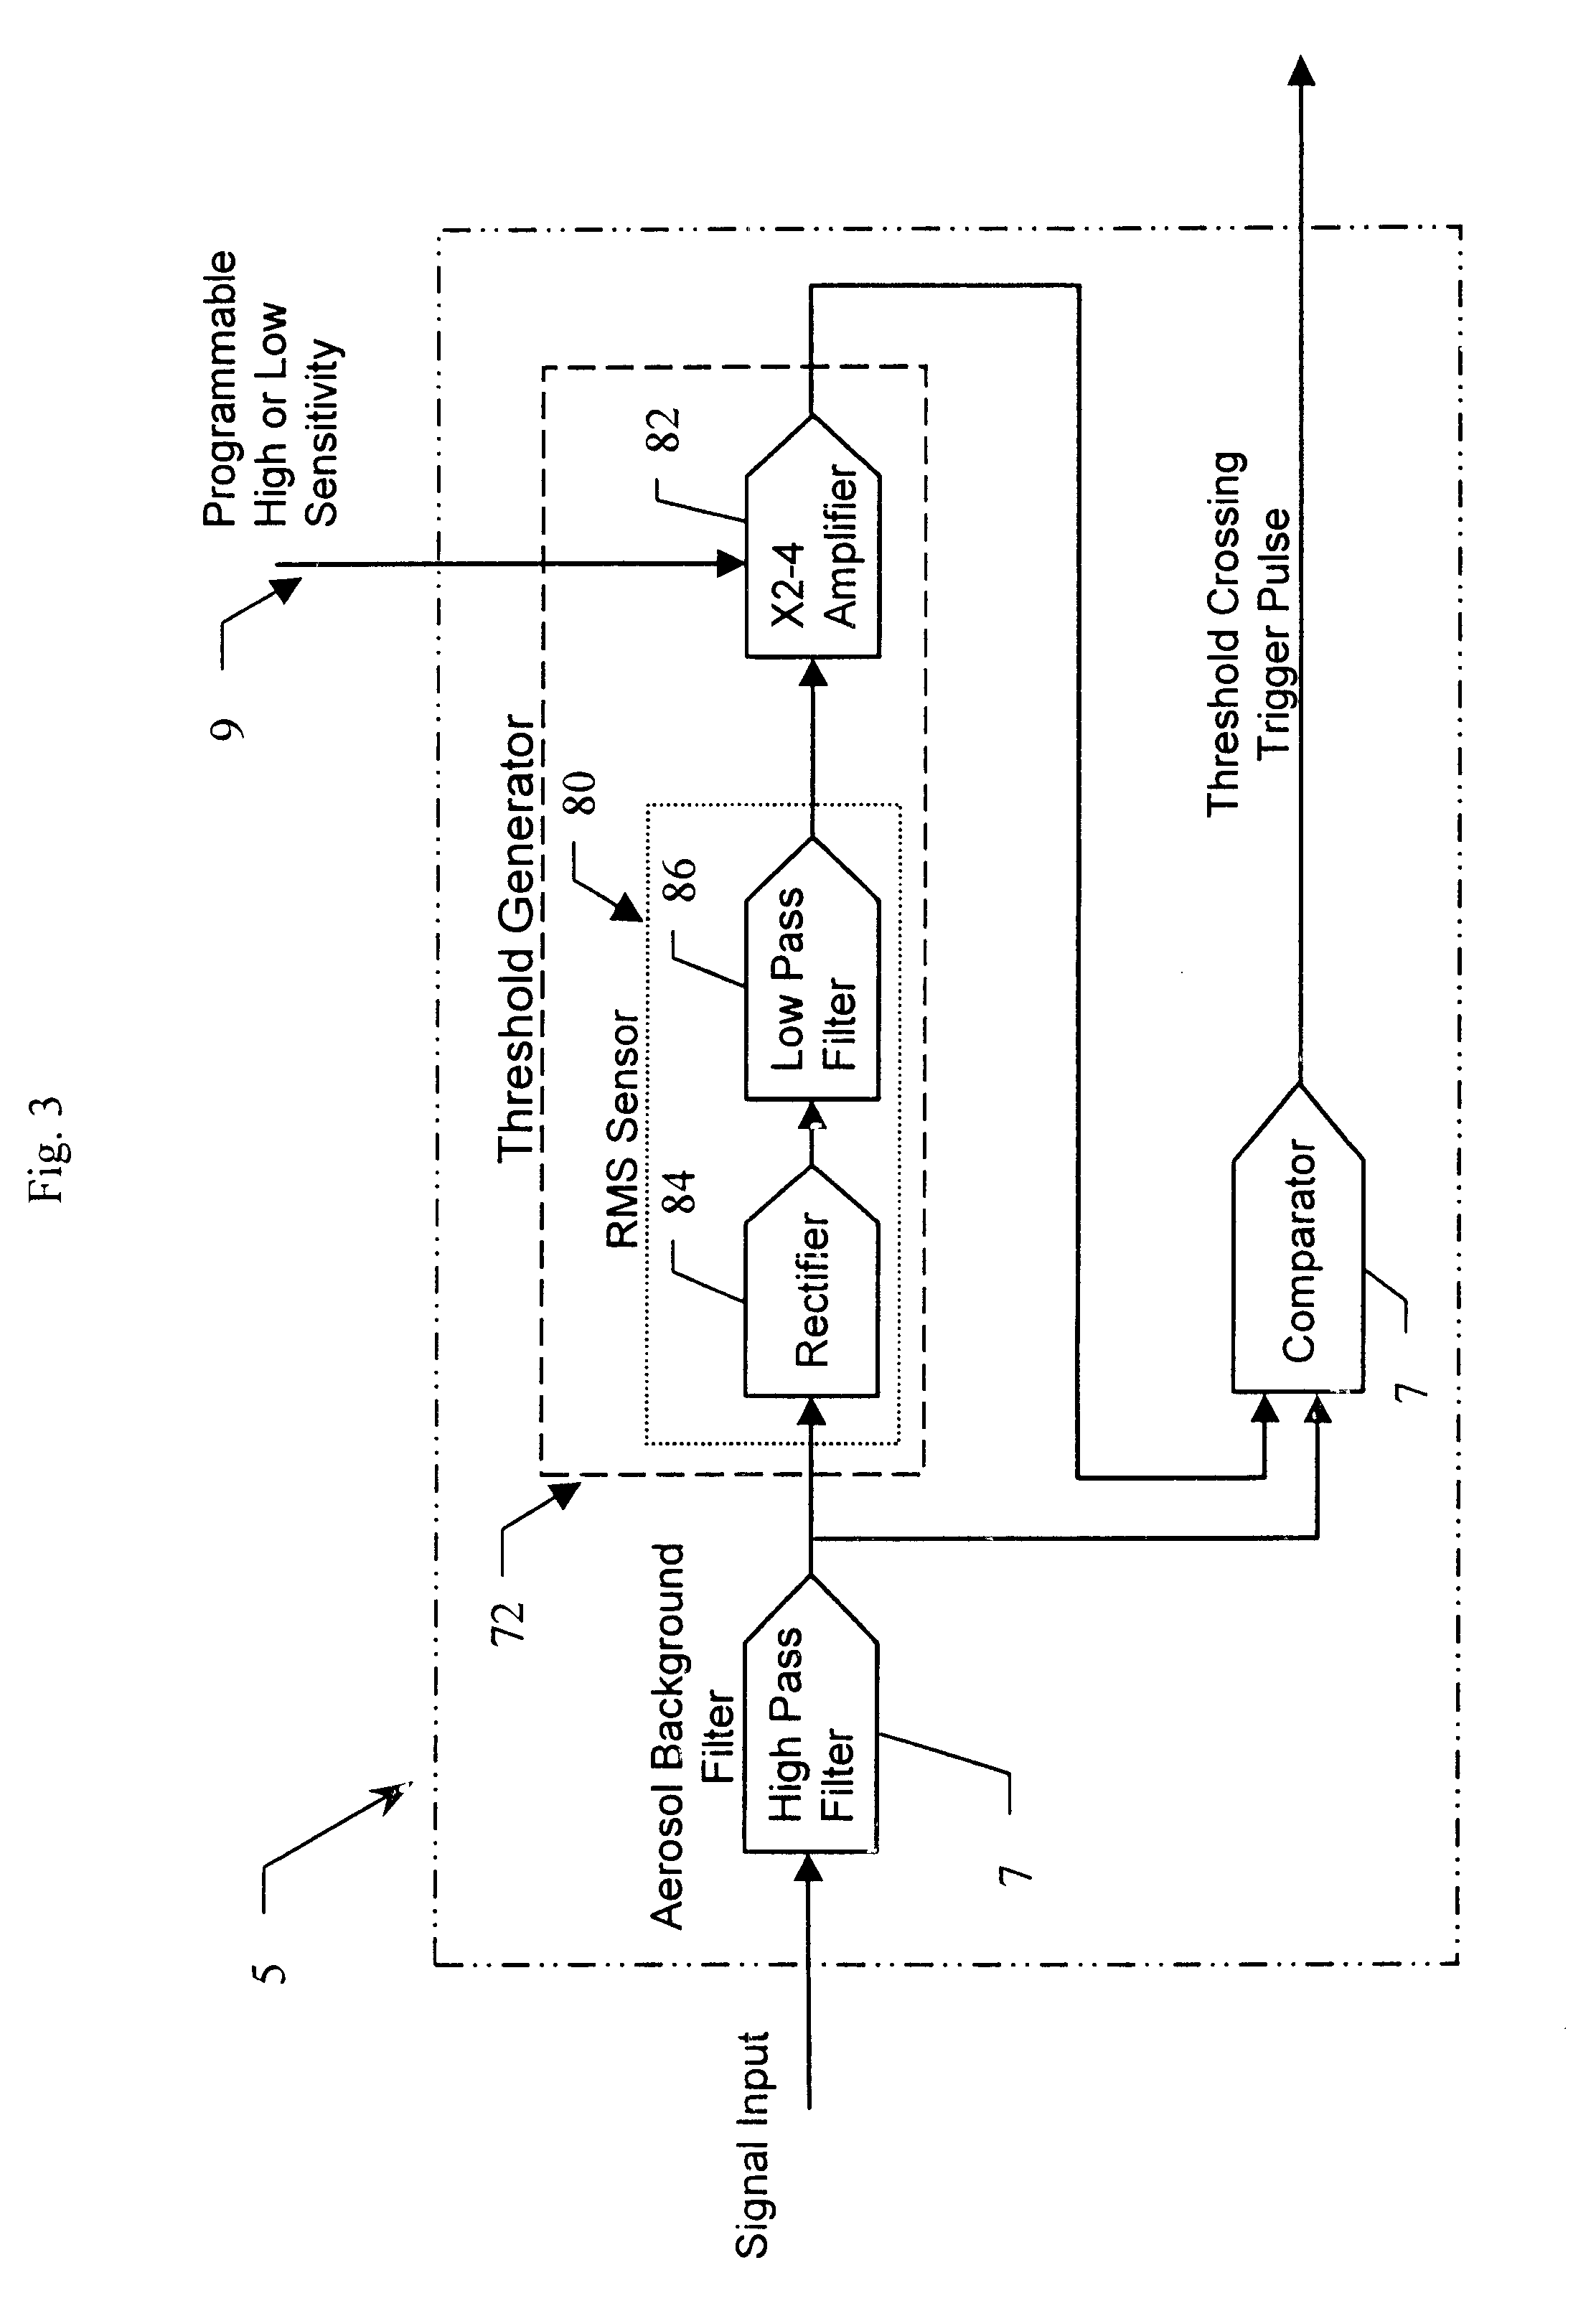 Dual mode adaptive threshold architecture for 3-D ladar FPA